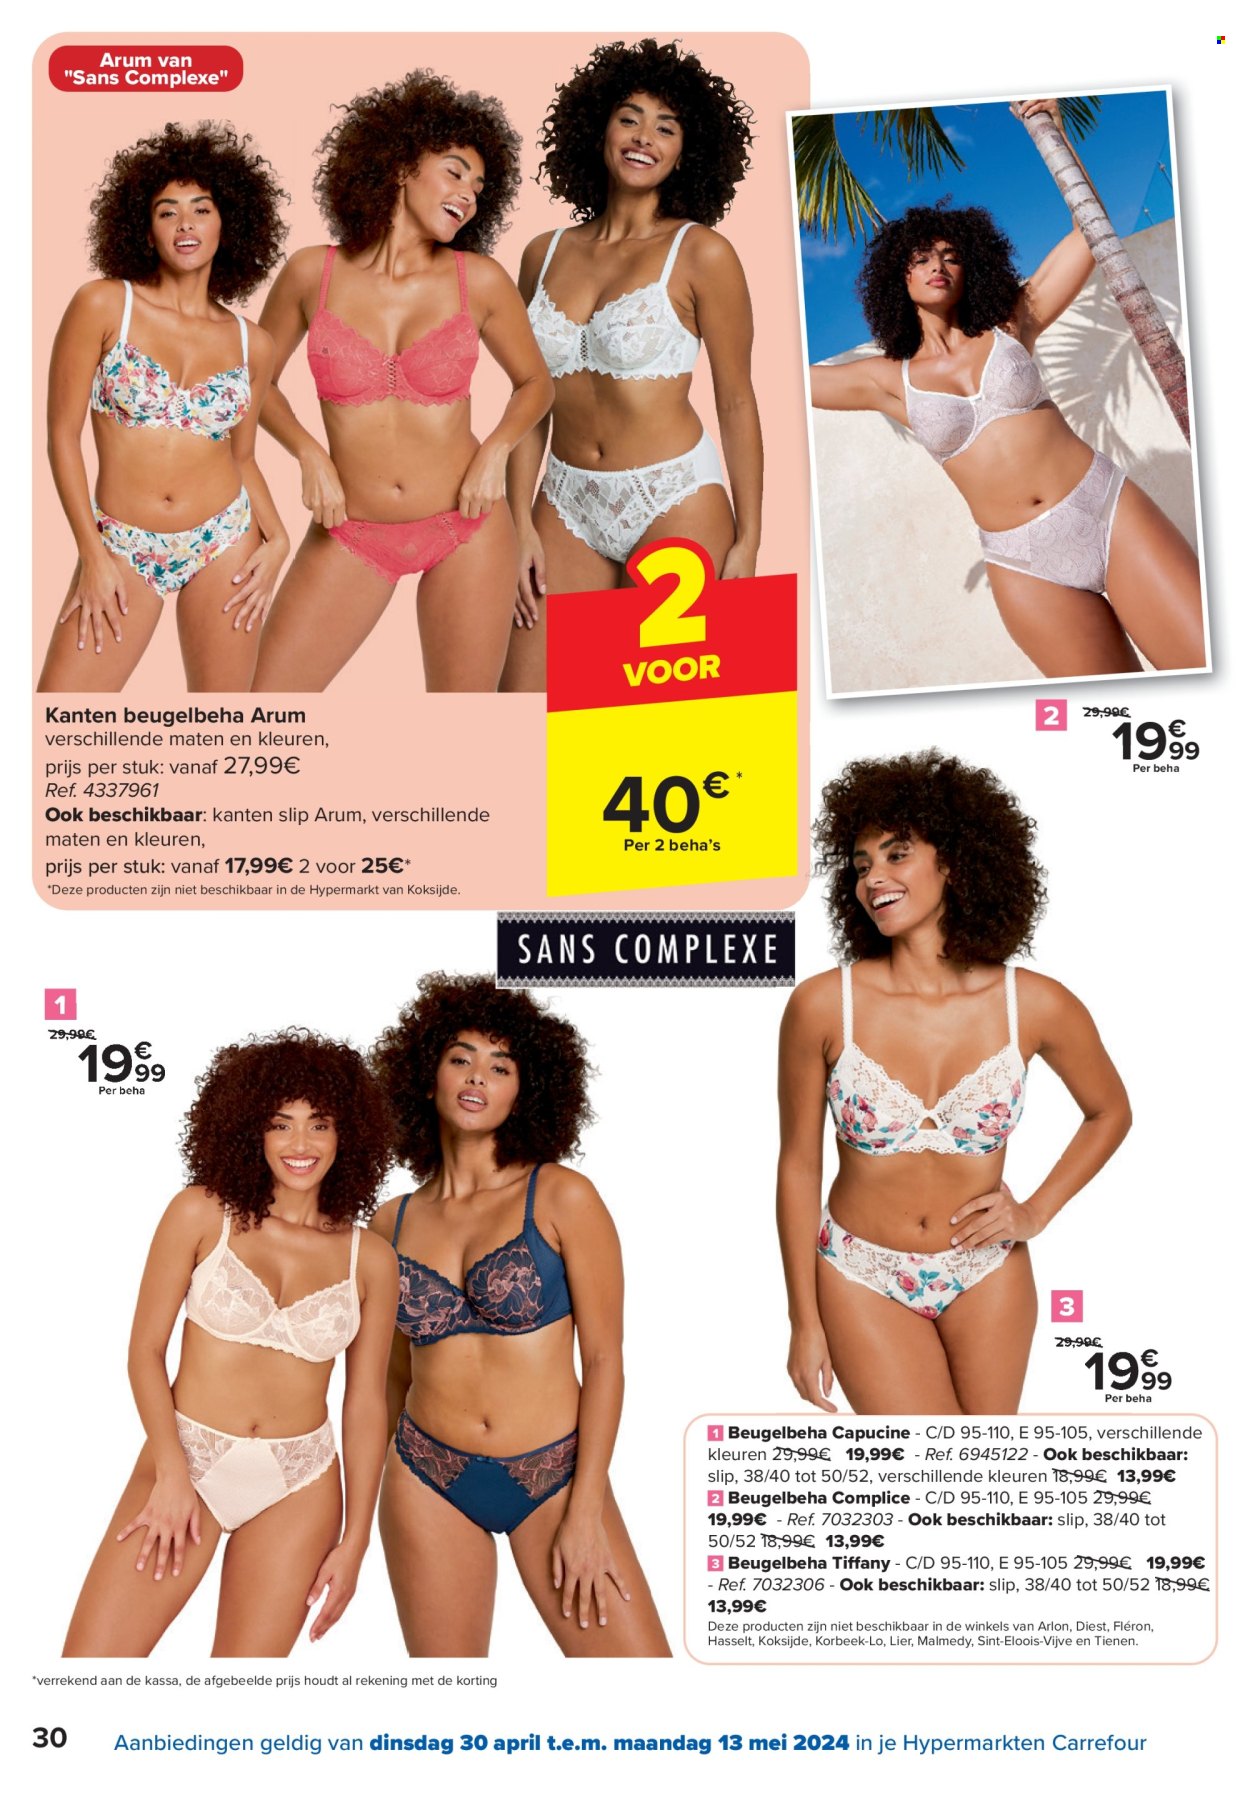 Catalogue Carrefour hypermarkt - 30.4.2024 - 13.5.2024. Page 30.